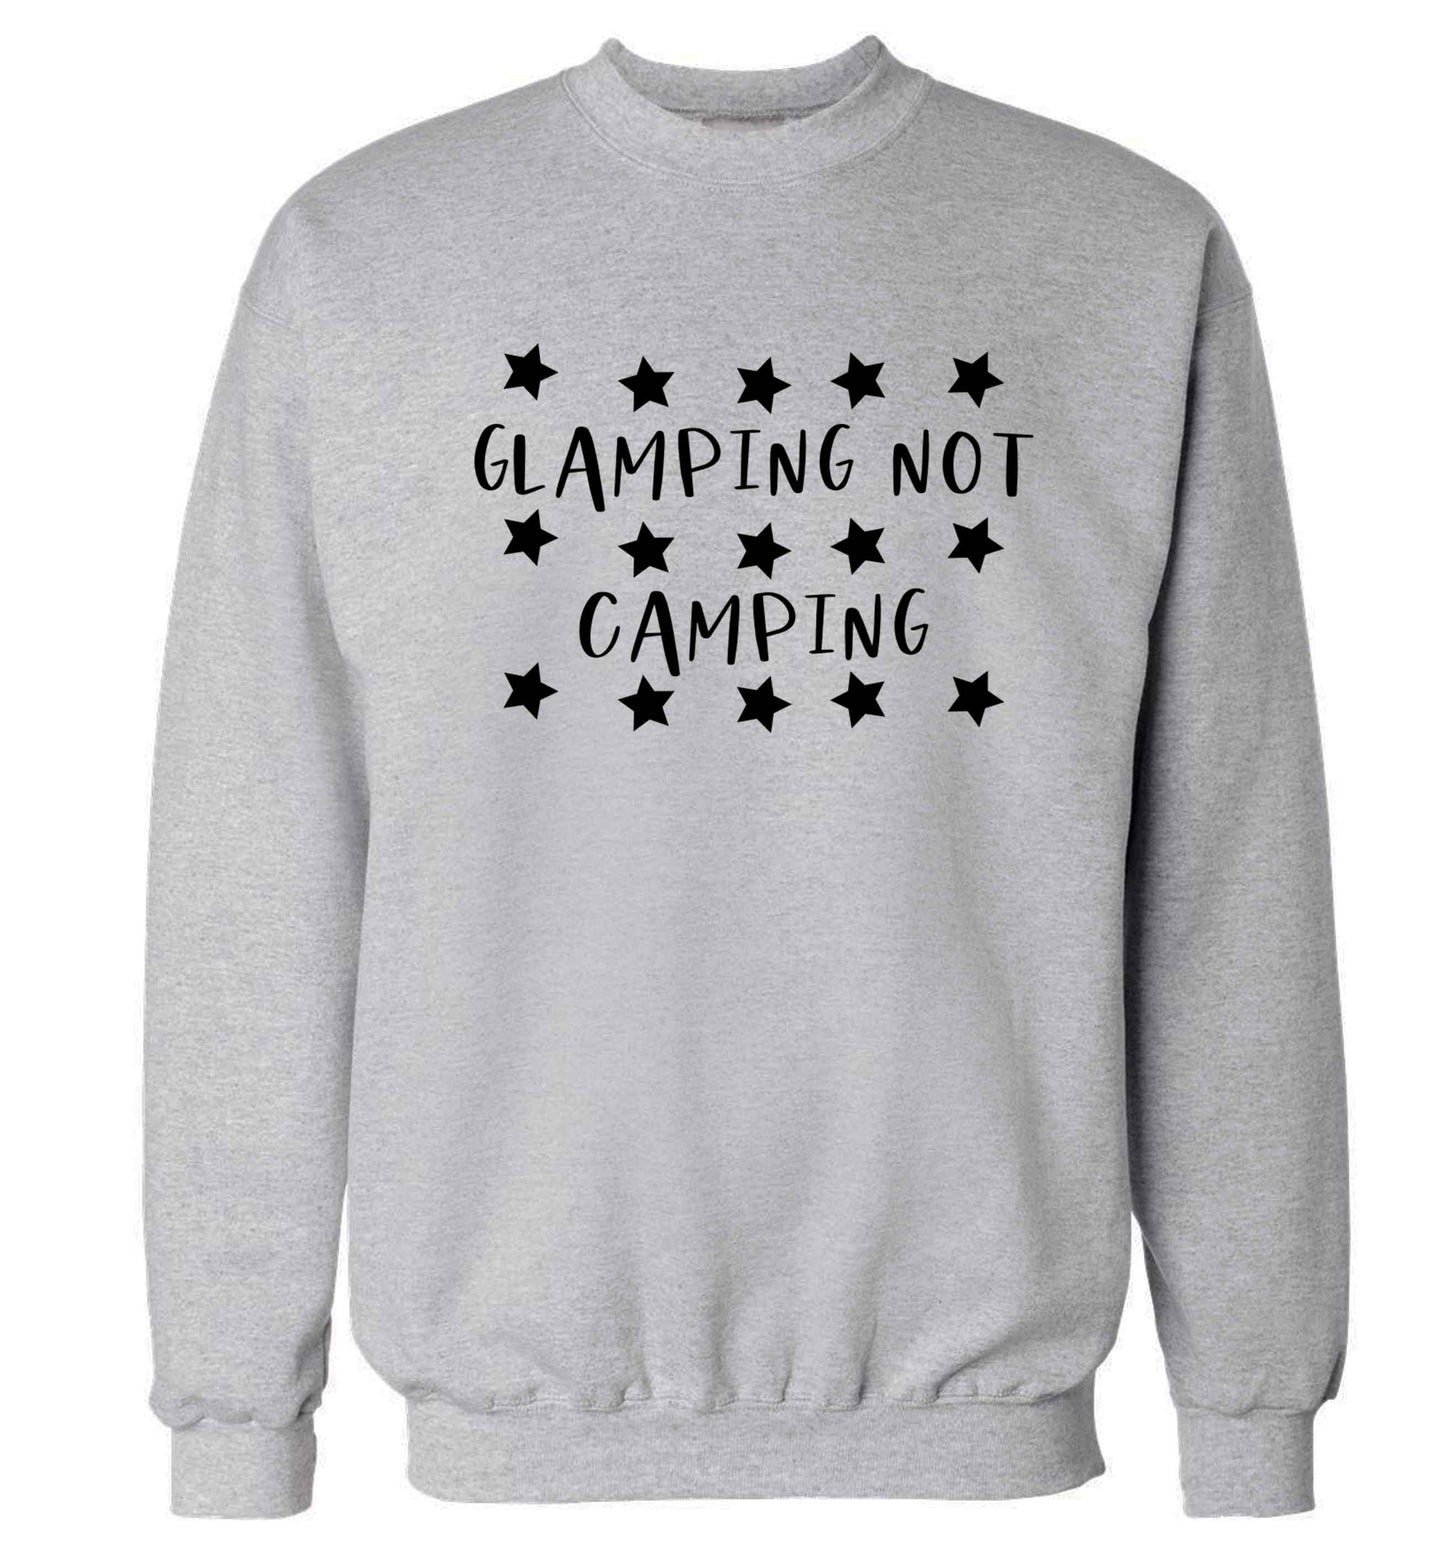 Glamping not camping Adult's unisex grey Sweater 2XL